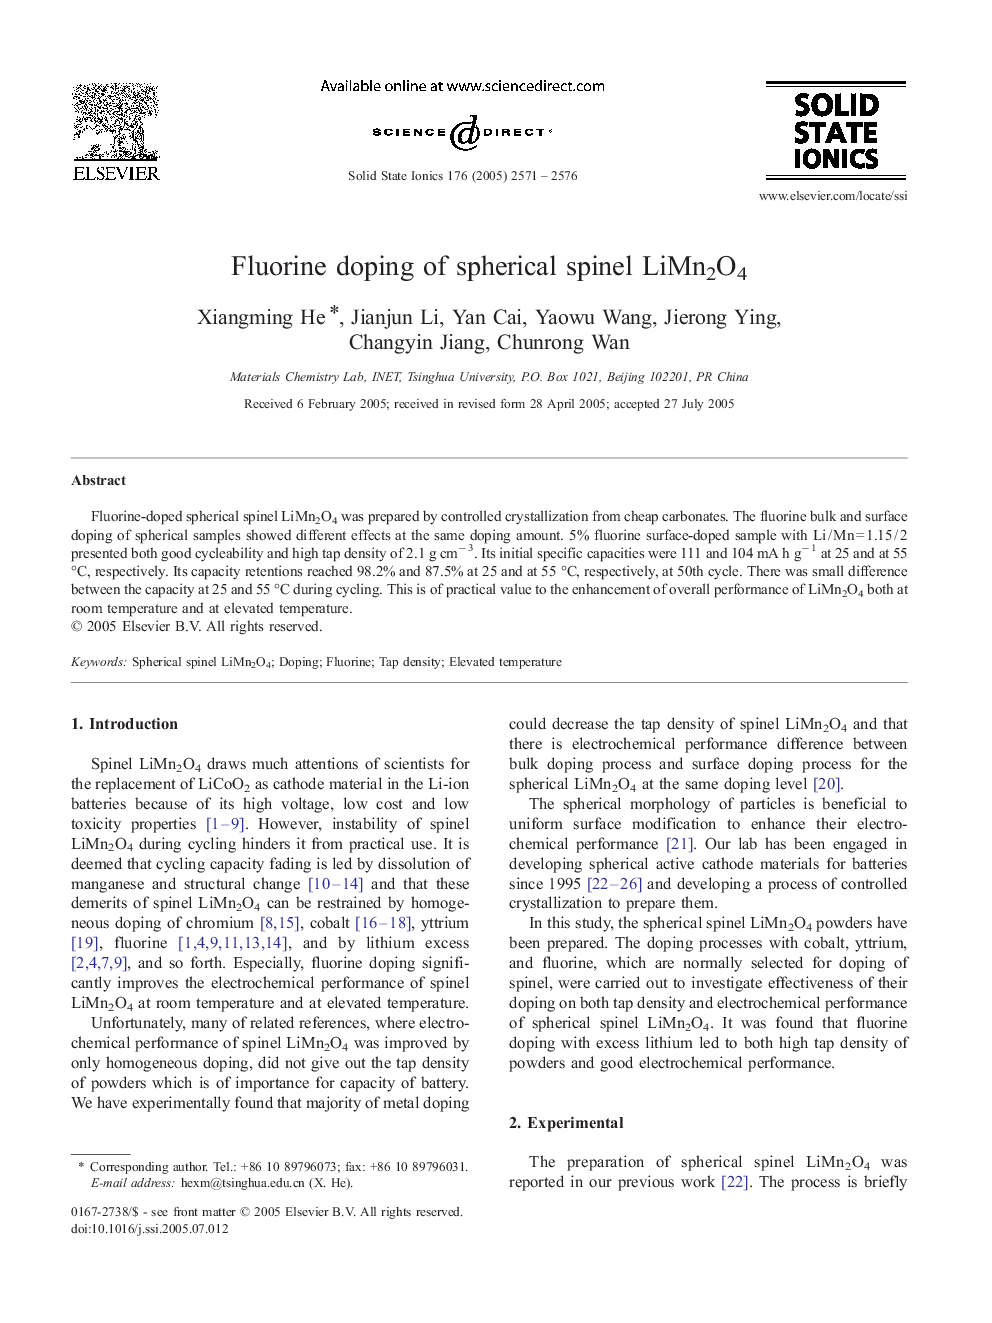 Fluorine doping of spherical spinel LiMn2O4